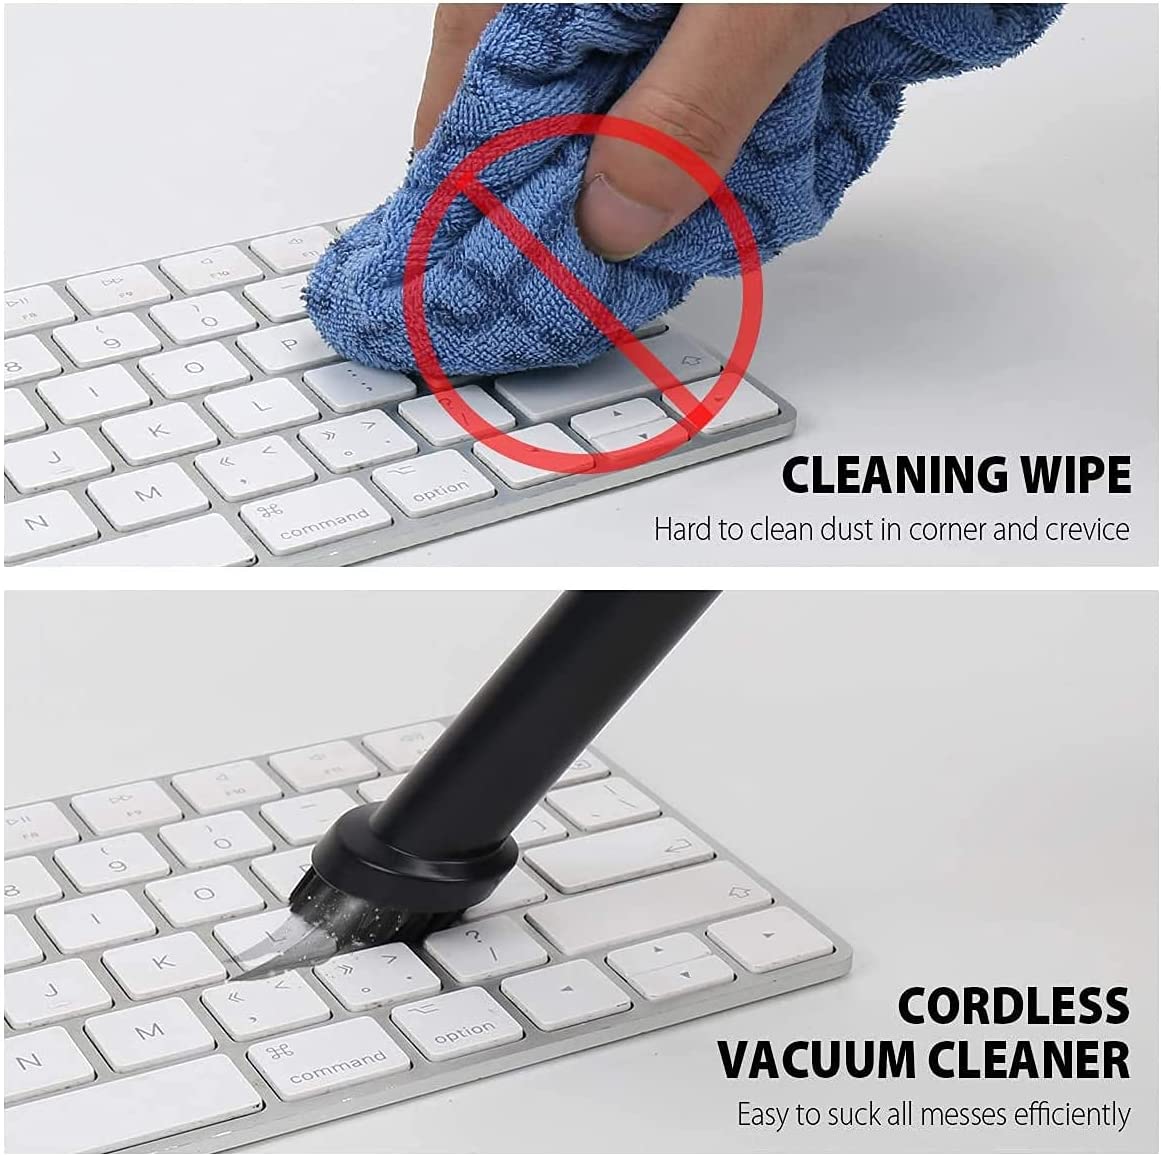 Keyboards-Keyboard-Cleaner-Powerful-Rechargeable-Mini-Vacuum-Cleaner-Cordless-Portable-Vacuum-Cleaner-Tool-for-Cleaning-Dust-Crumbs-Scraps-for-Laptop-Computer-31